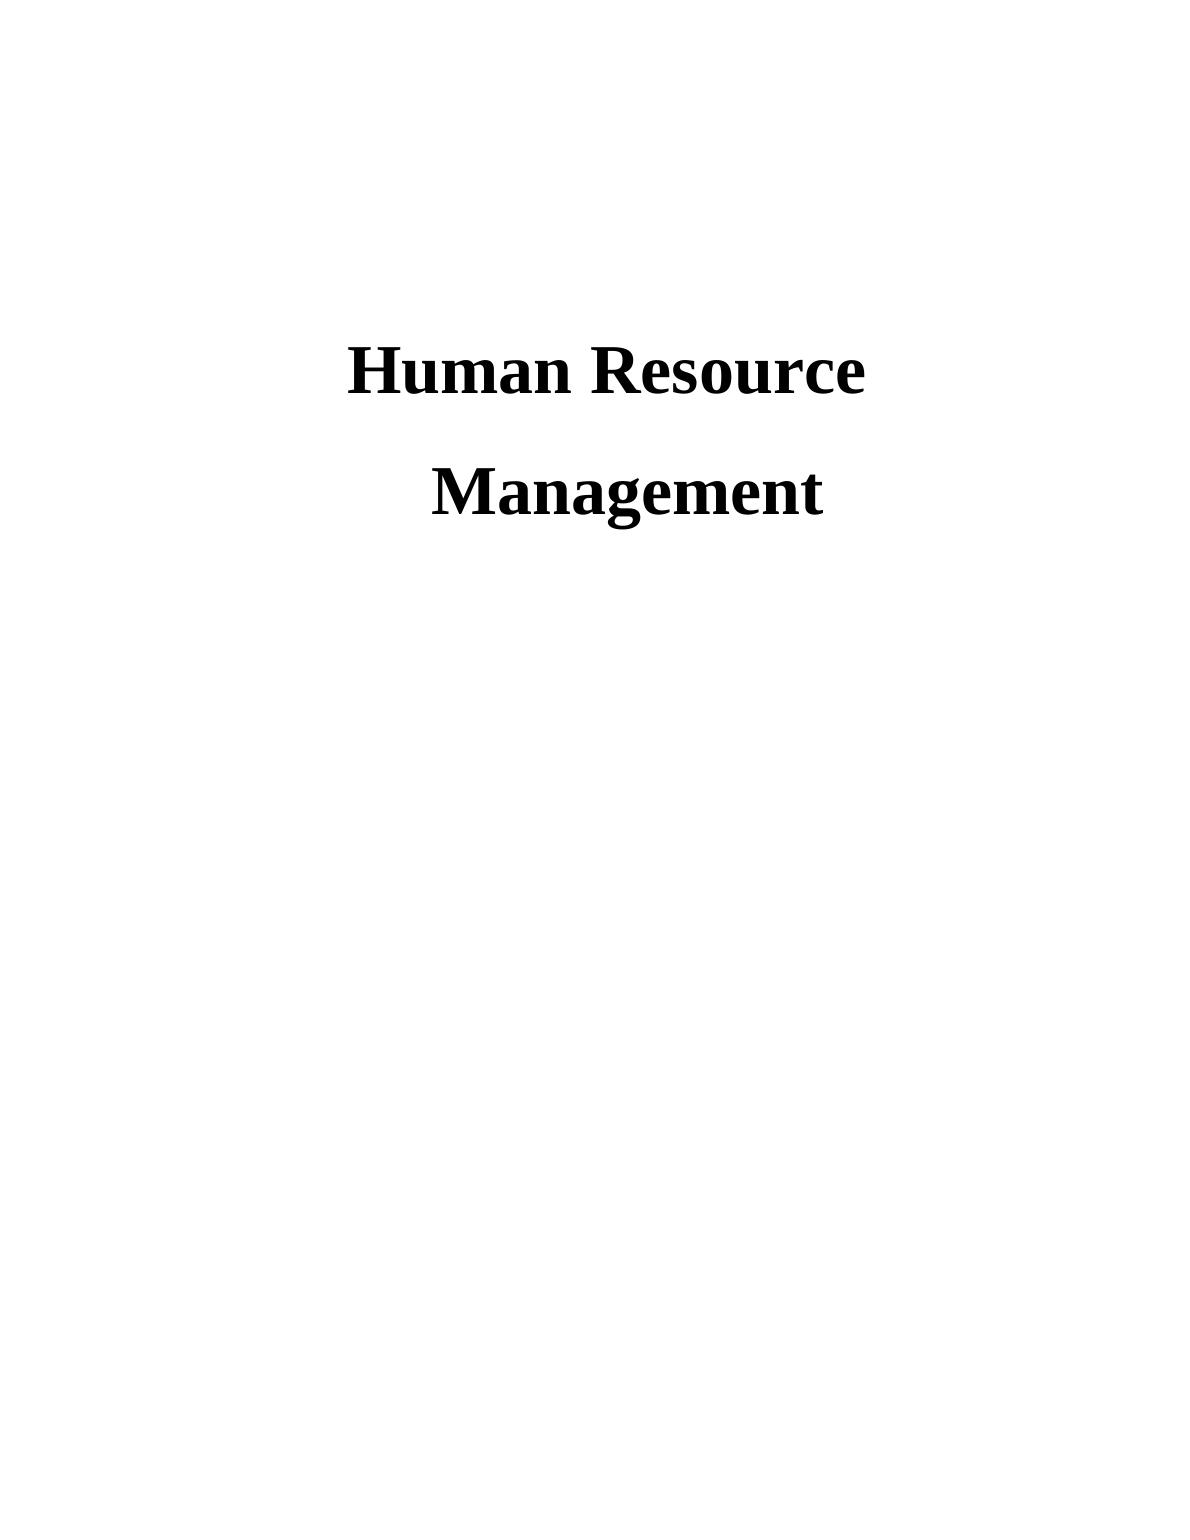 Human Resource Management: Functions, Recruitment, and Selection_1